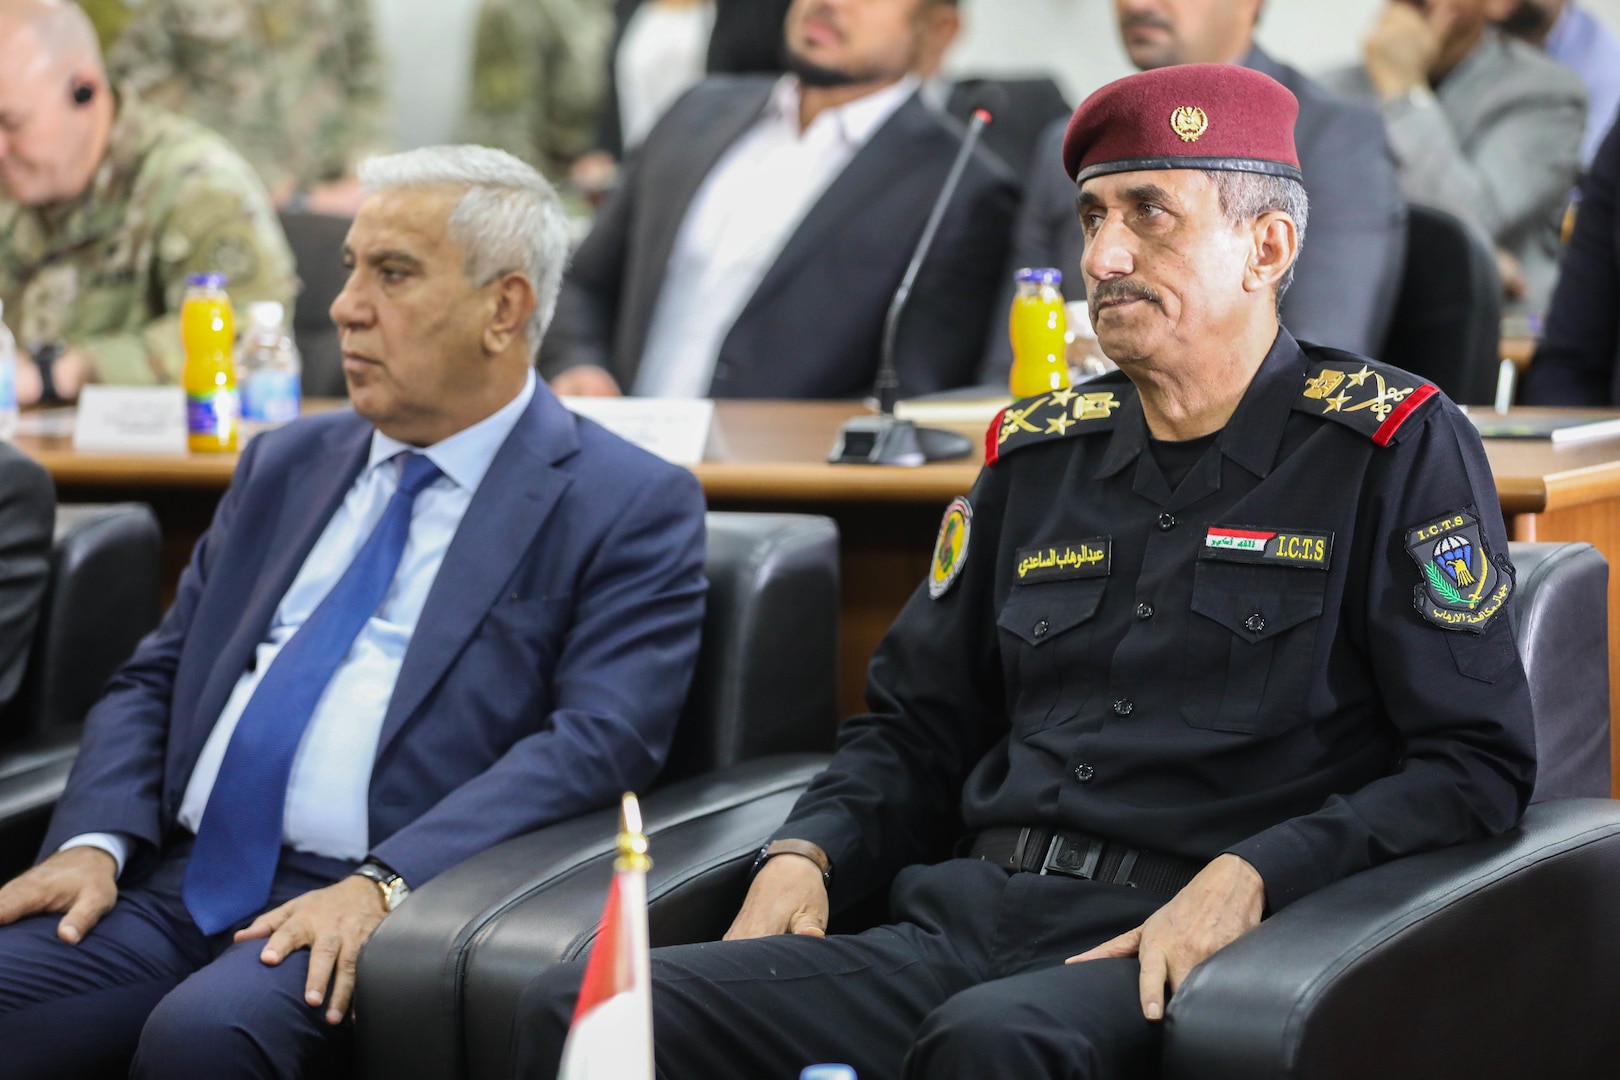 Staff Gen. Abdel Wahab al-Saadi, head of the Iraqi Counter-Terrorism Service, listens intently during a counter-terrorism conference May 9, 2022, in Baghdad, Iraq. The counter-terrorism conference brought together key leaders from the Iraqi Ministry of the Interior, Iraqi Ministry of Defense and the Kurdistan Regional Government Ministry of Peshmerga to discuss enhancing joint planning, coordination and collaboration between all counter-terrorism elements in support of the shared goal of defeating terrorism. (U.S. Army photo by Staff Sgt. Bree-Ann Ramos-Clifton)